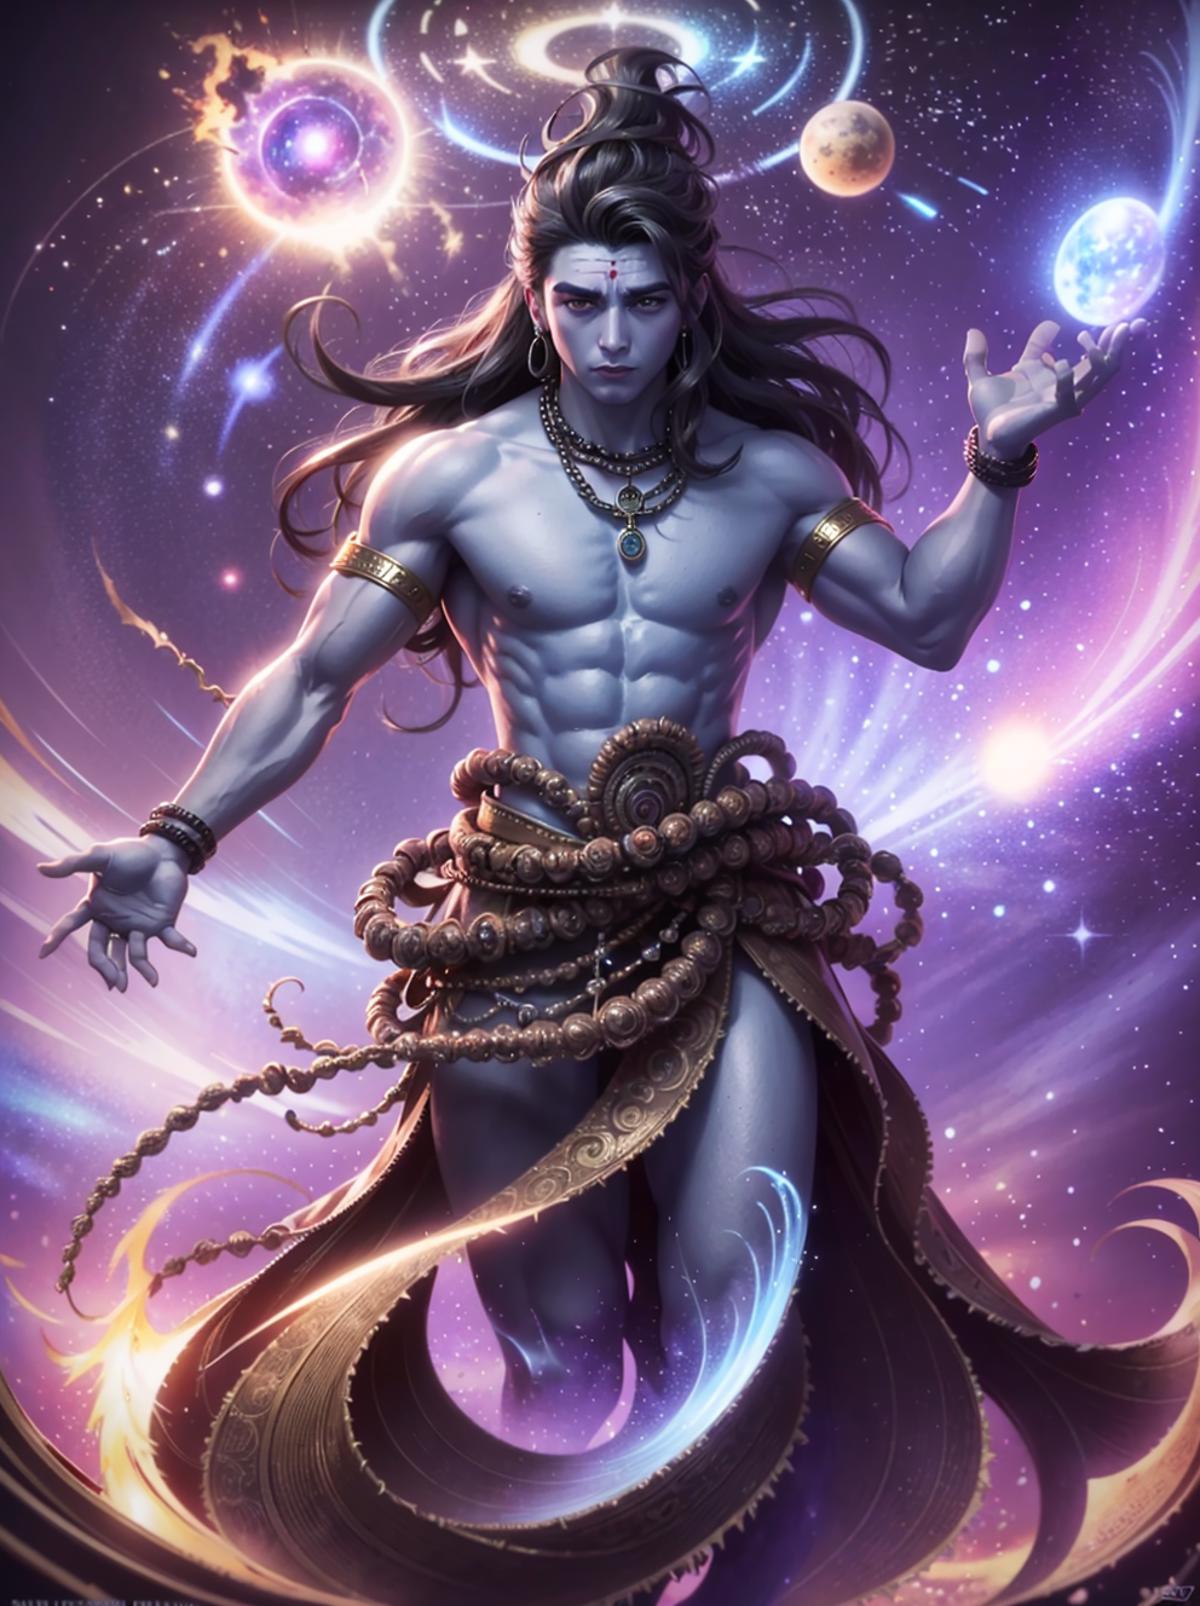 Lord Shiva | reimagined image by Zavy